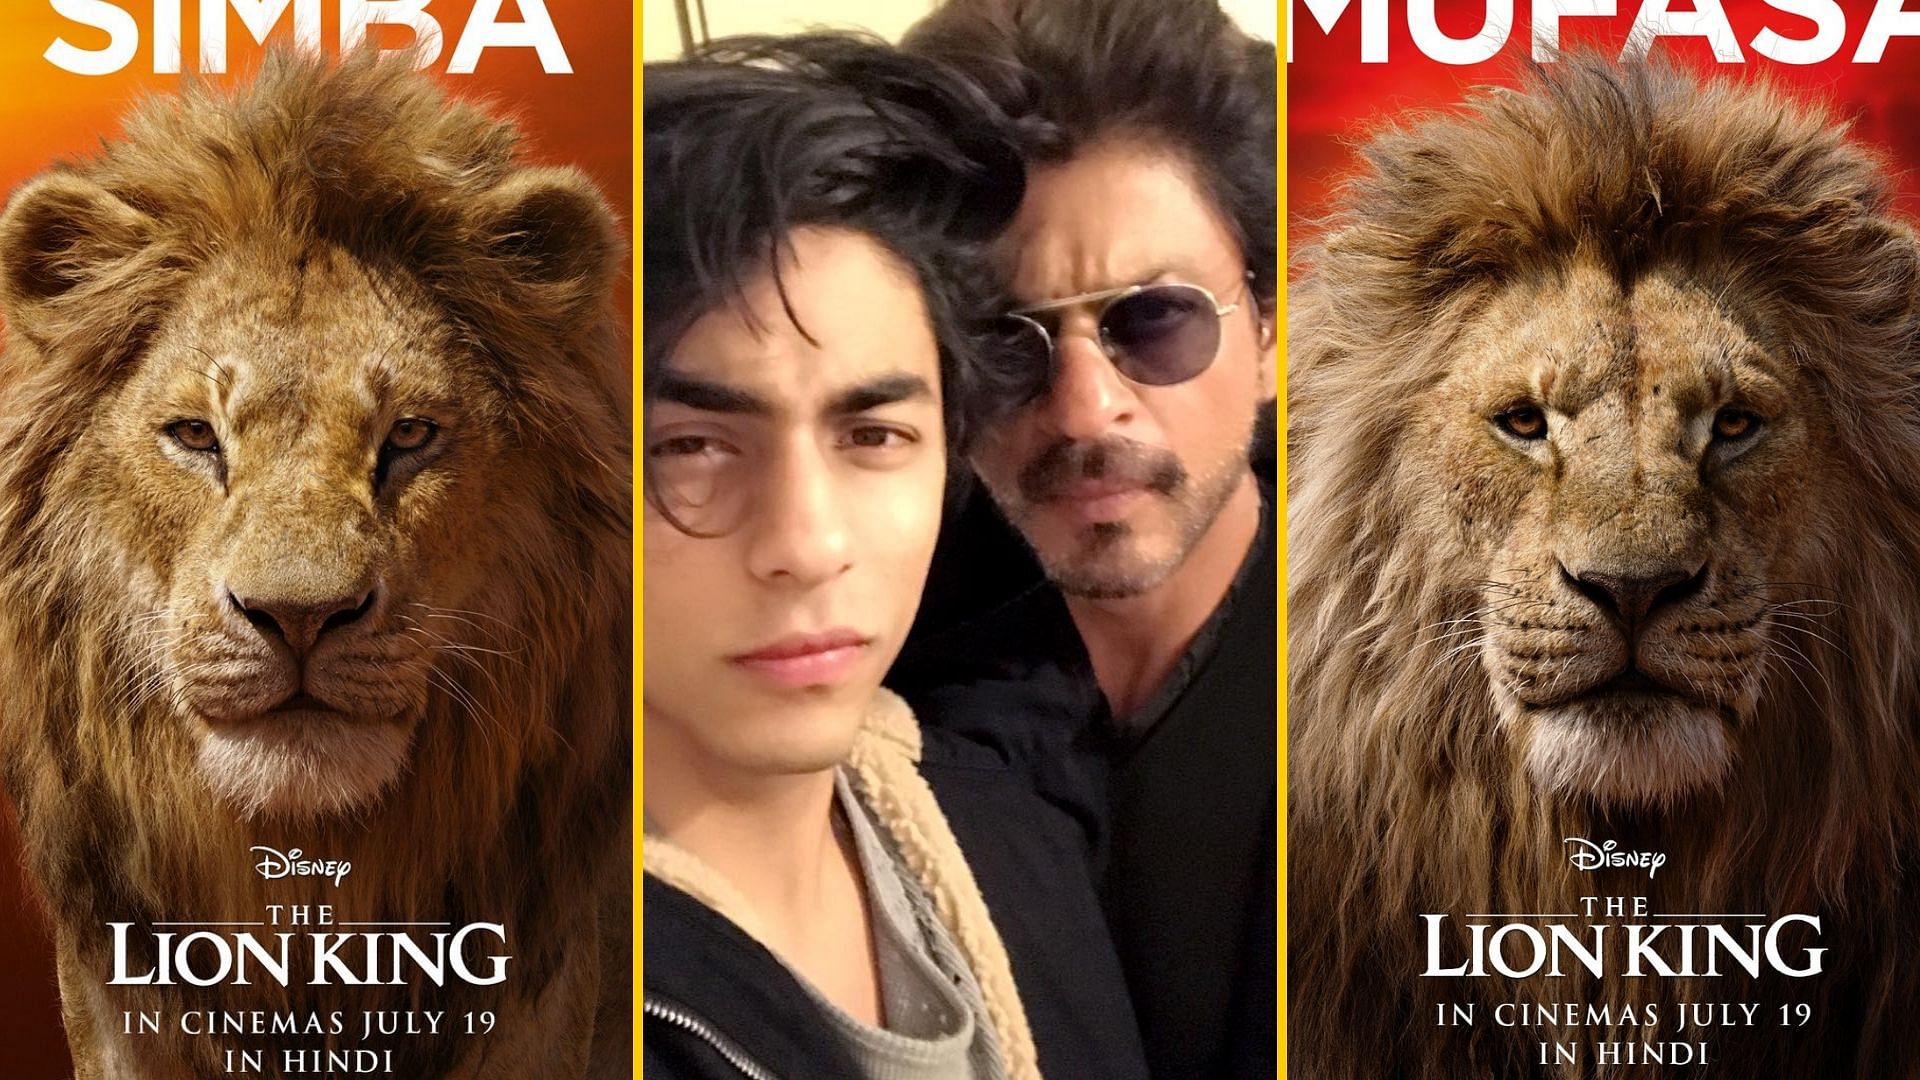 Shah Rukh Khan and Aryan Khan will voice Mufasa and Simba in the Hindi version of the live-action remake of <i>The Lion King</i>.